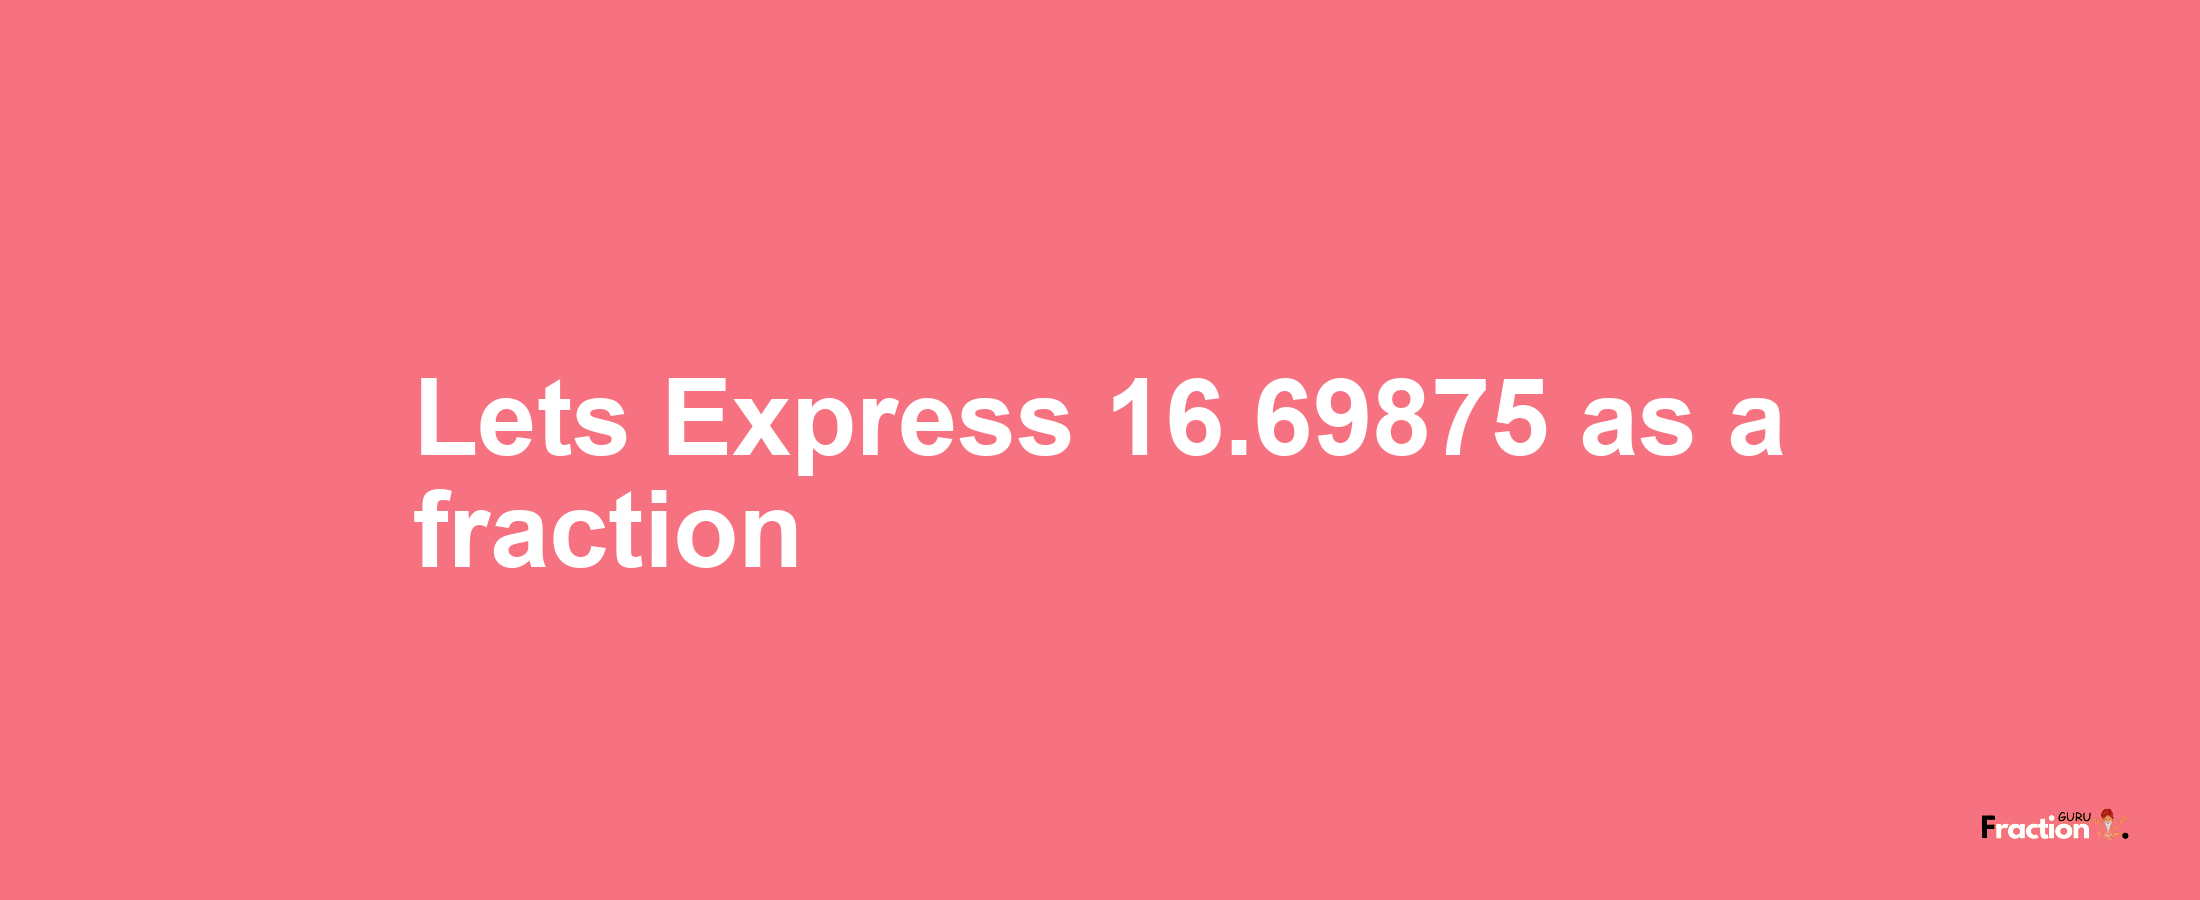 Lets Express 16.69875 as afraction